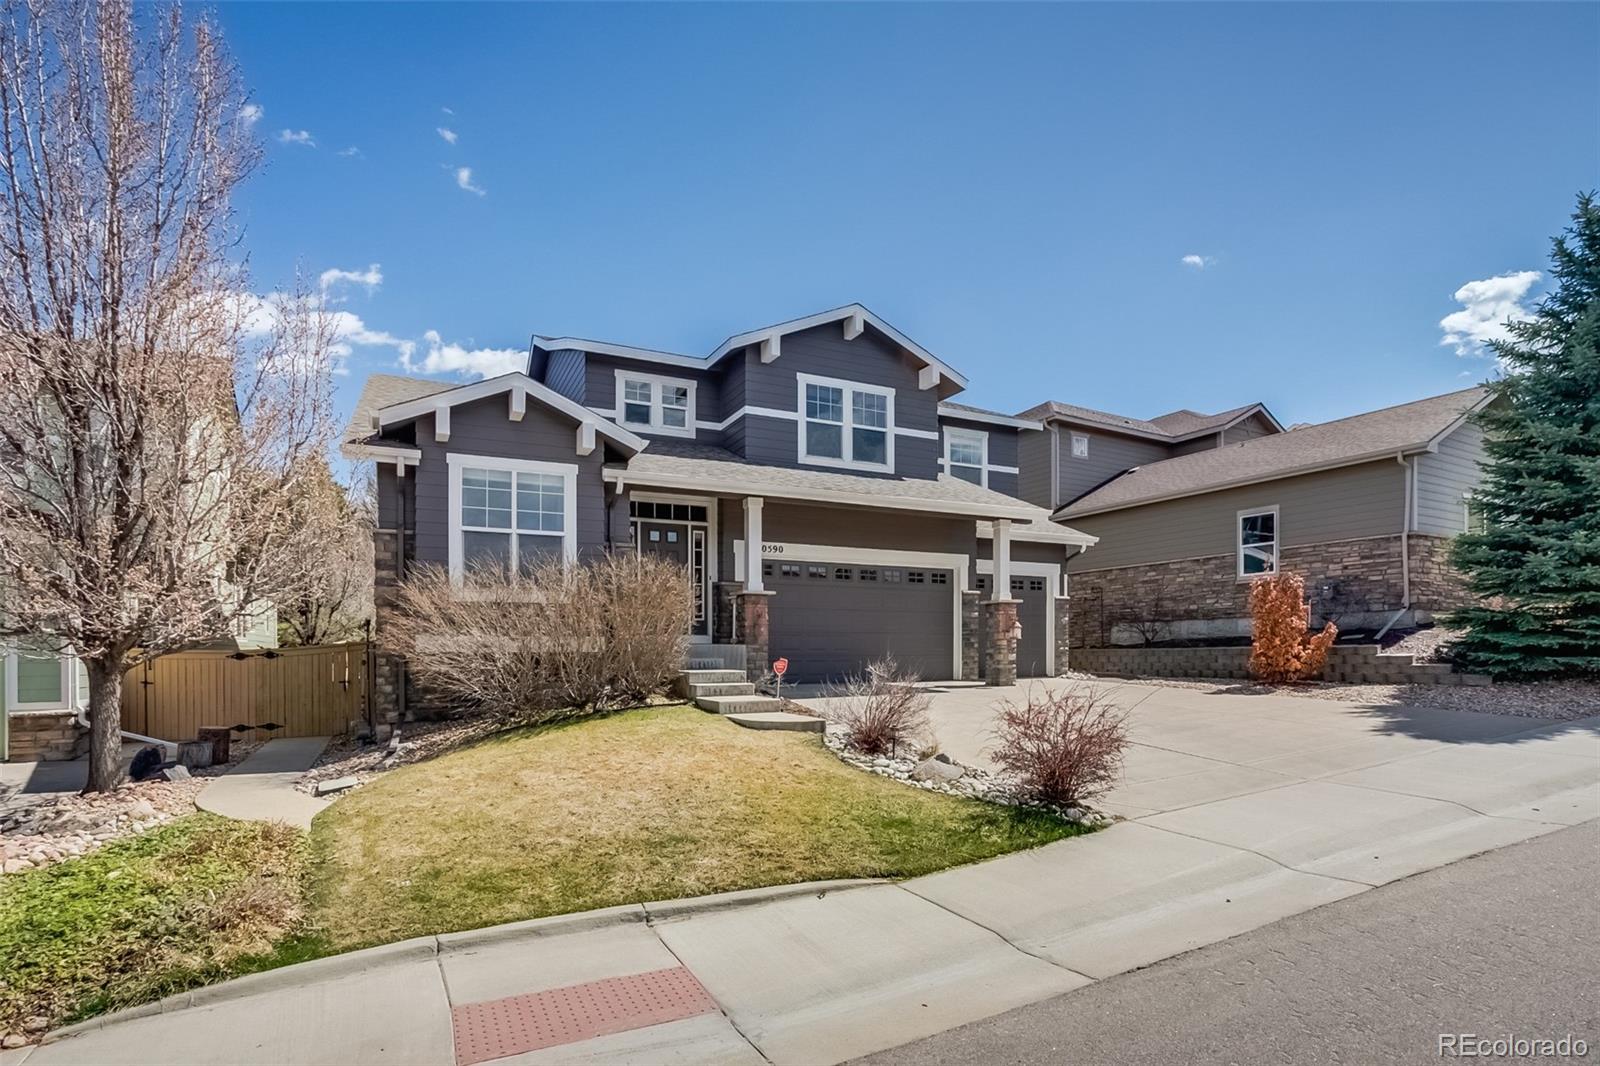 10590  stonington street, highlands ranch sold home. Closed on 2024-05-22 for $1,227,500.